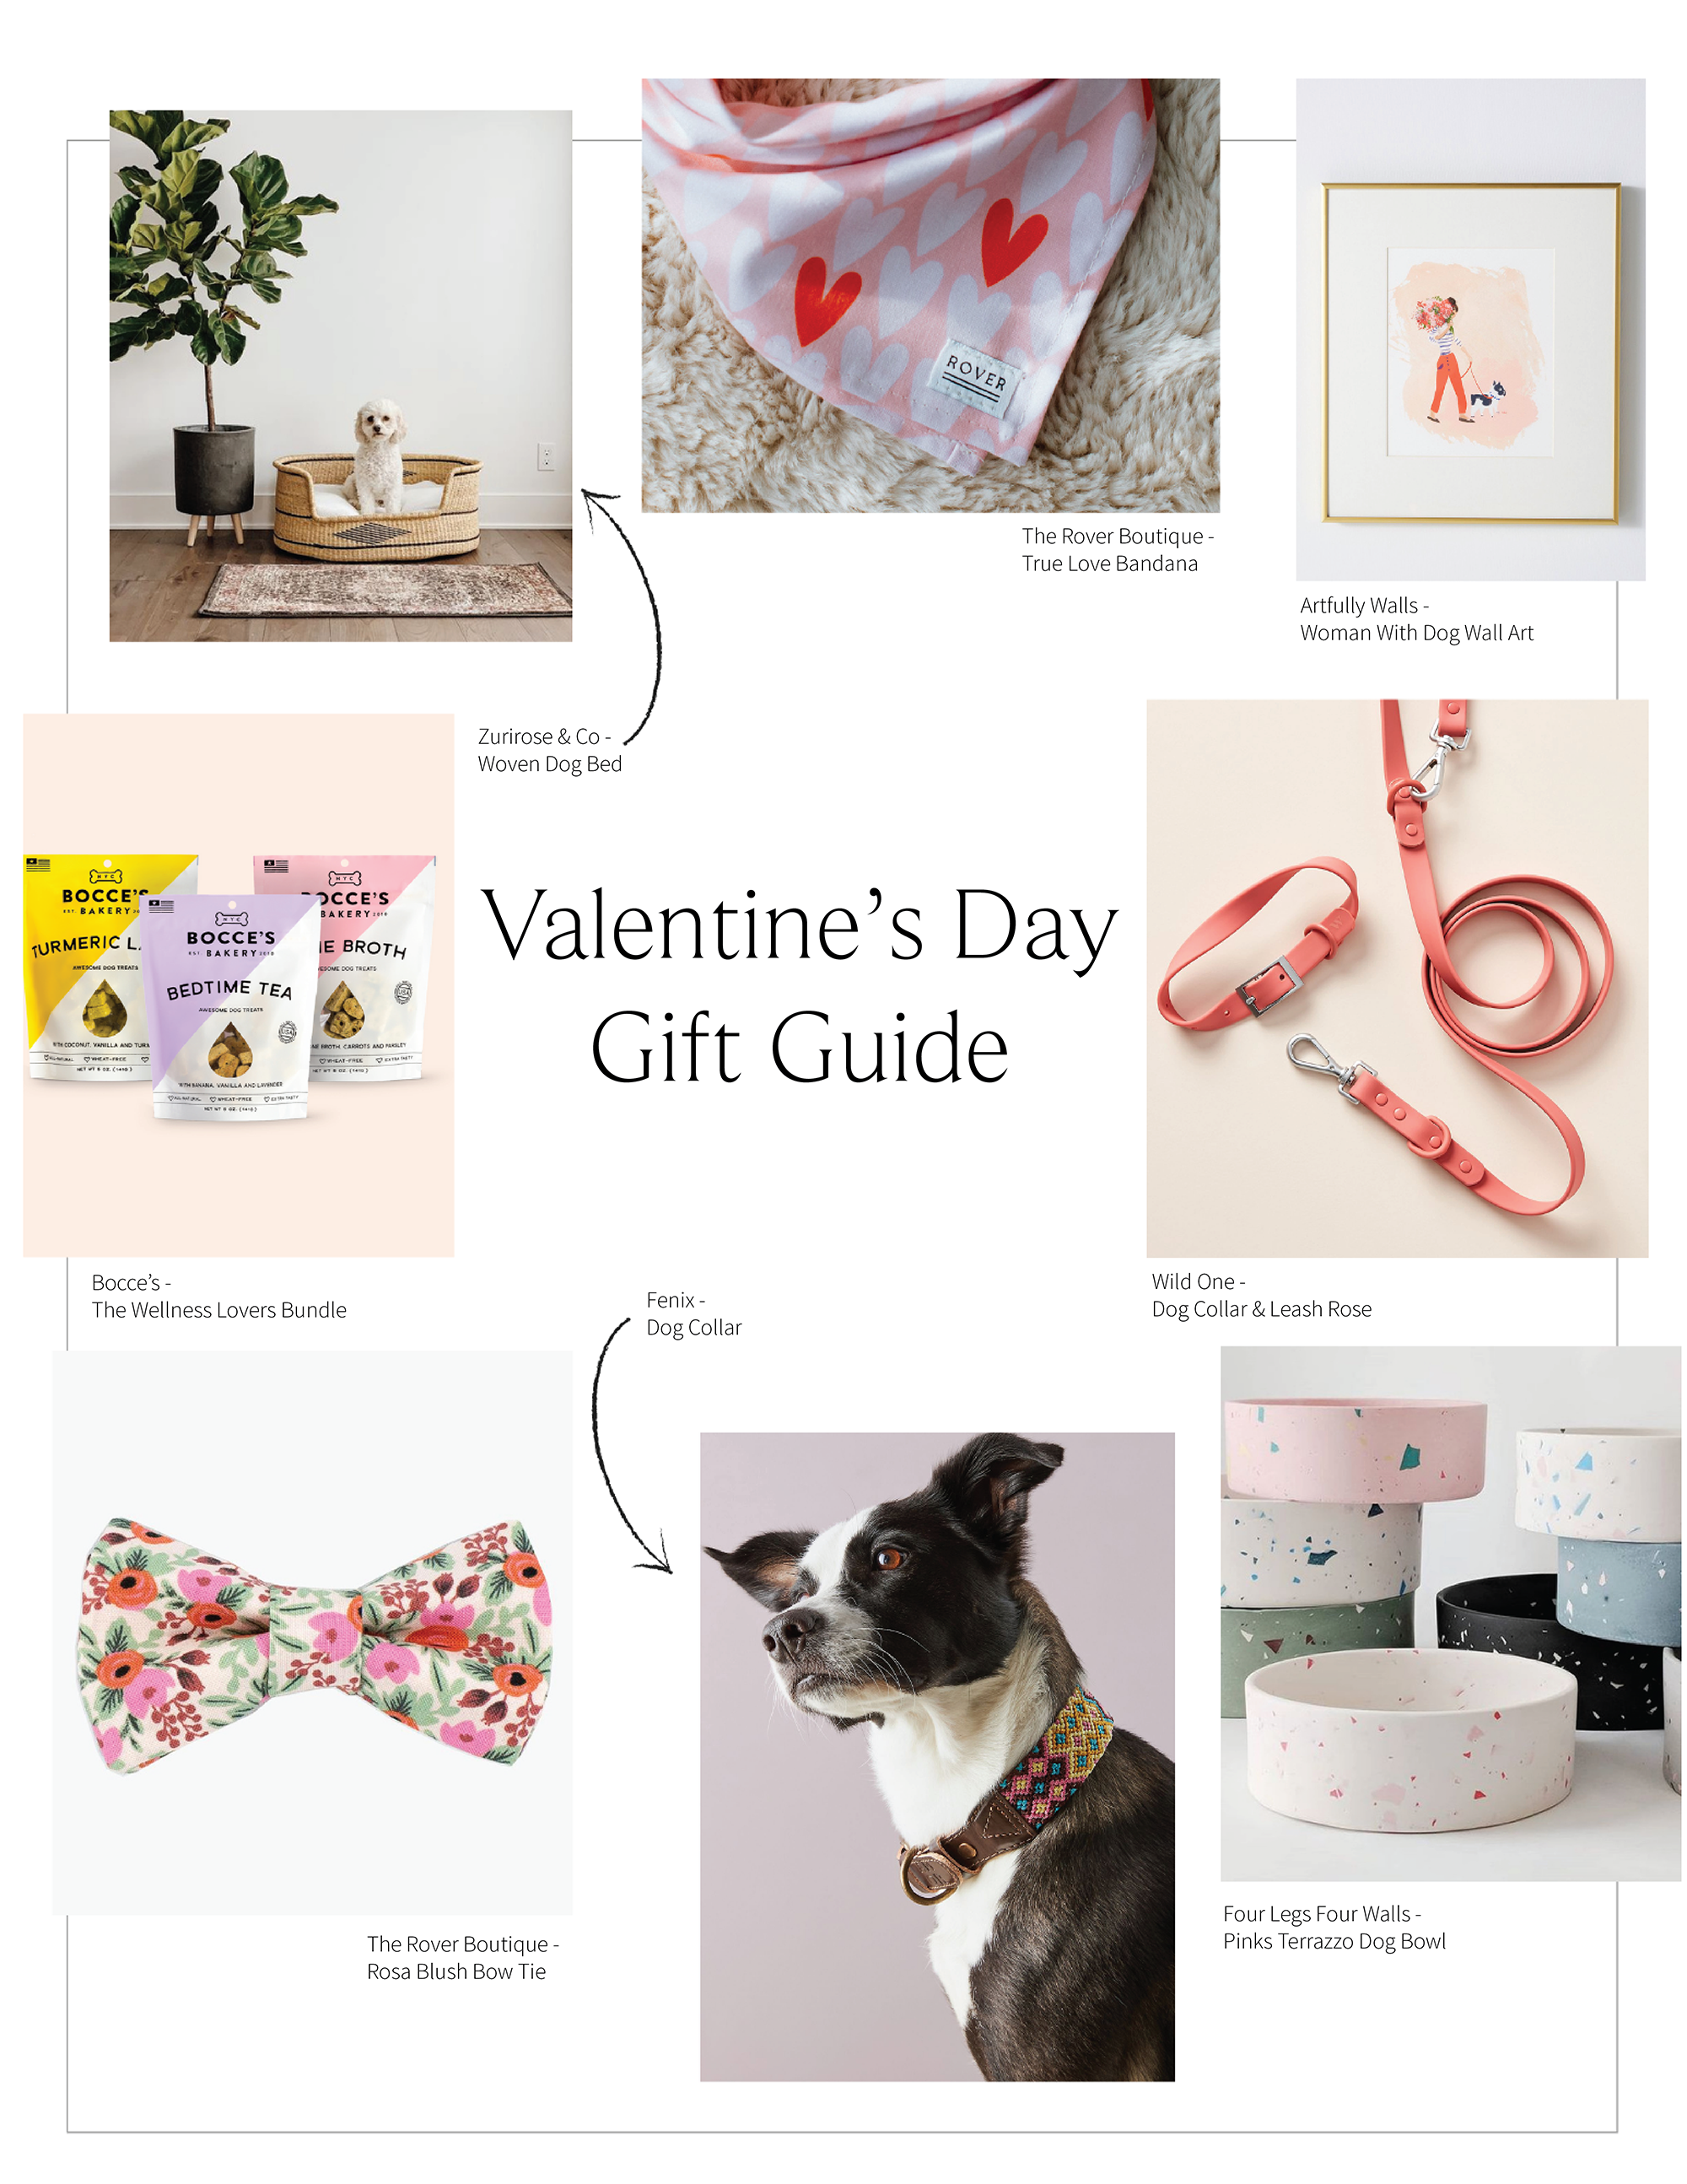 Valentine's Day Gift Guide for you and your dog